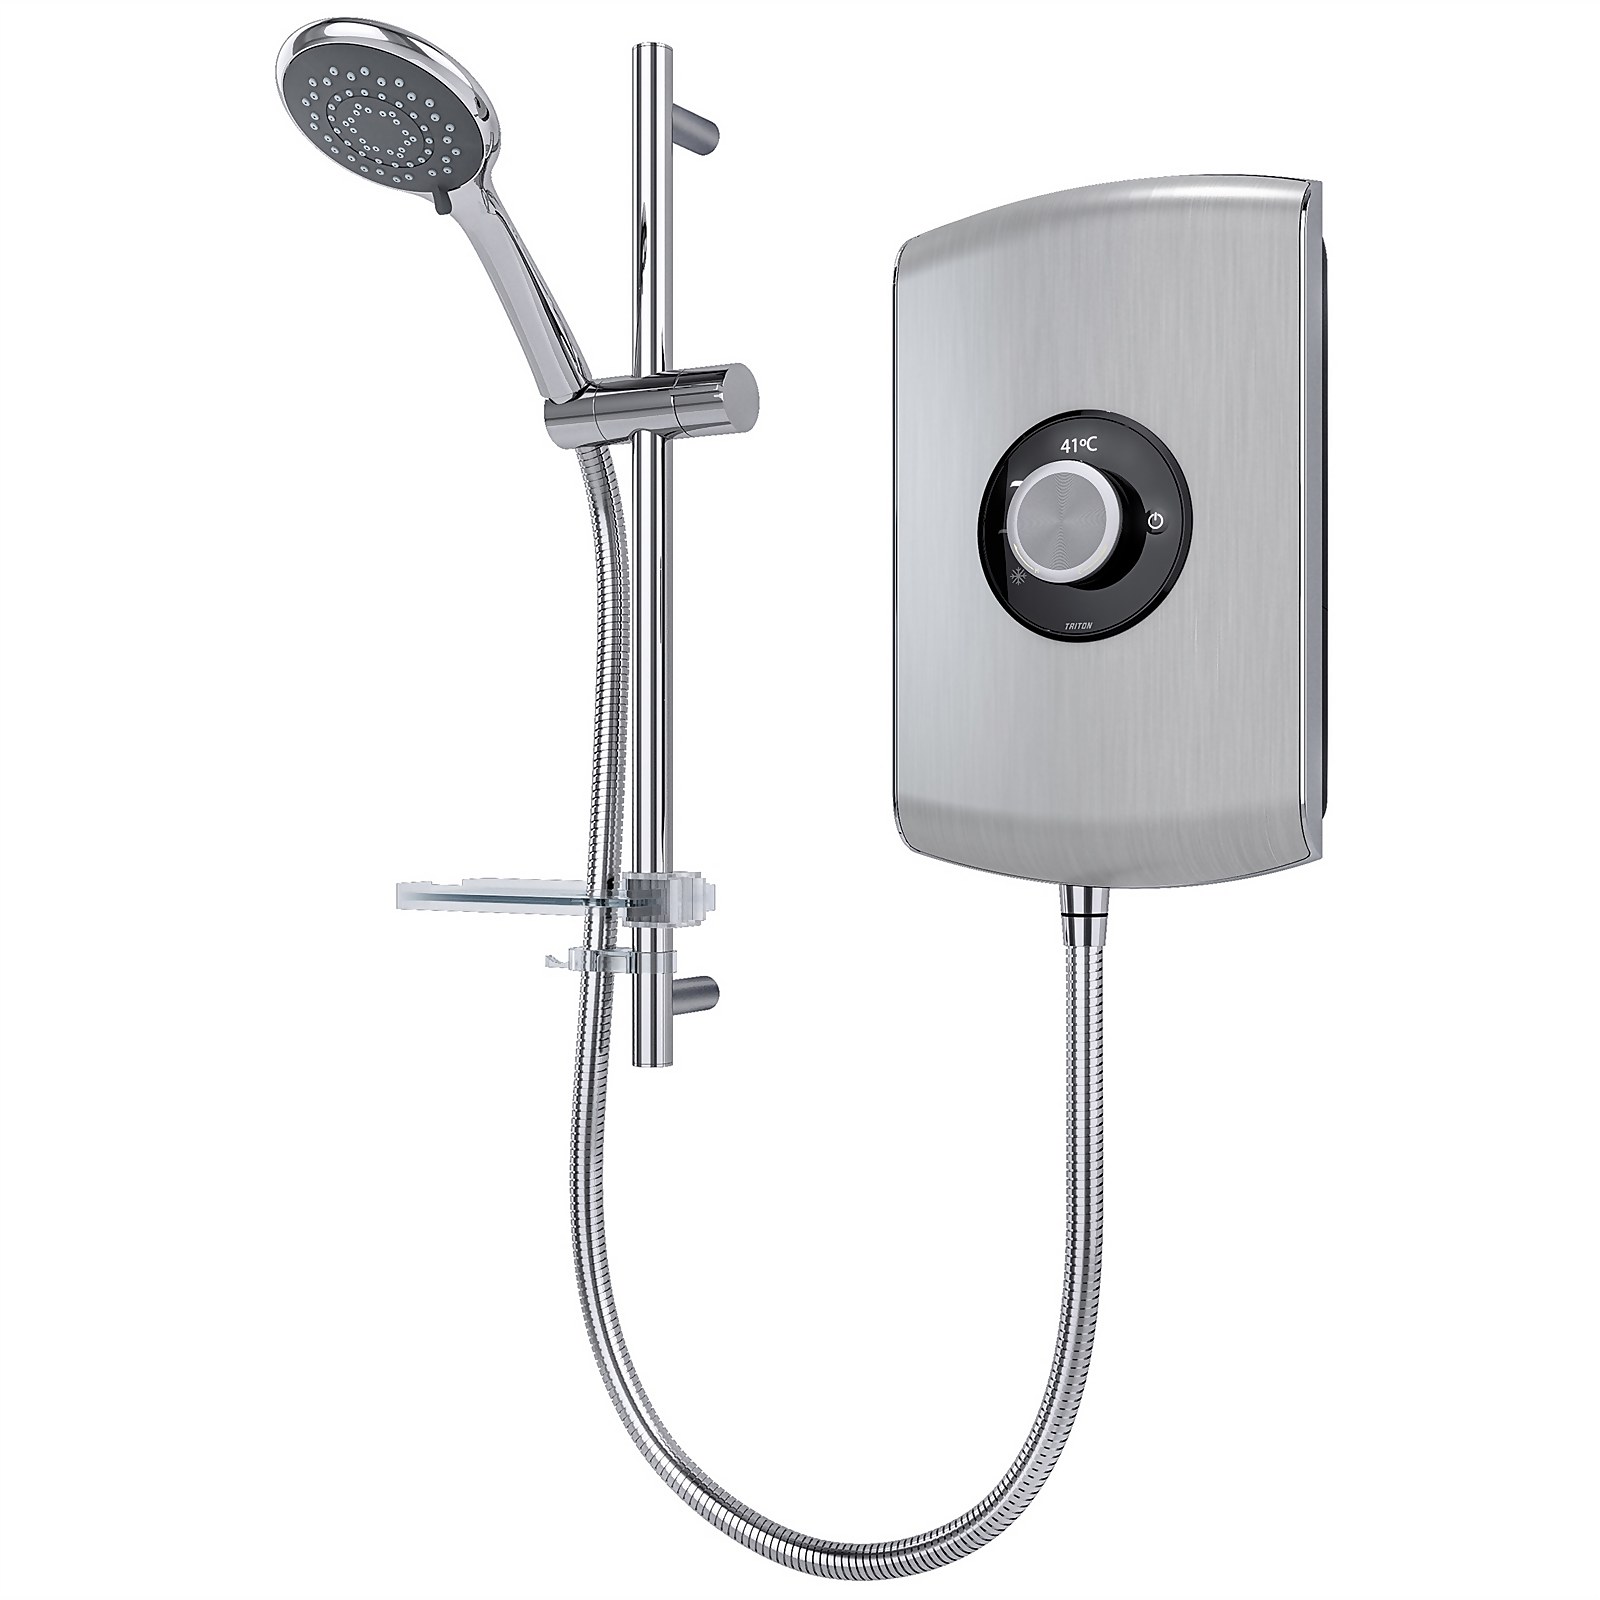 Photo of Amore 8.5kw Electric Shower - Brushed Steel